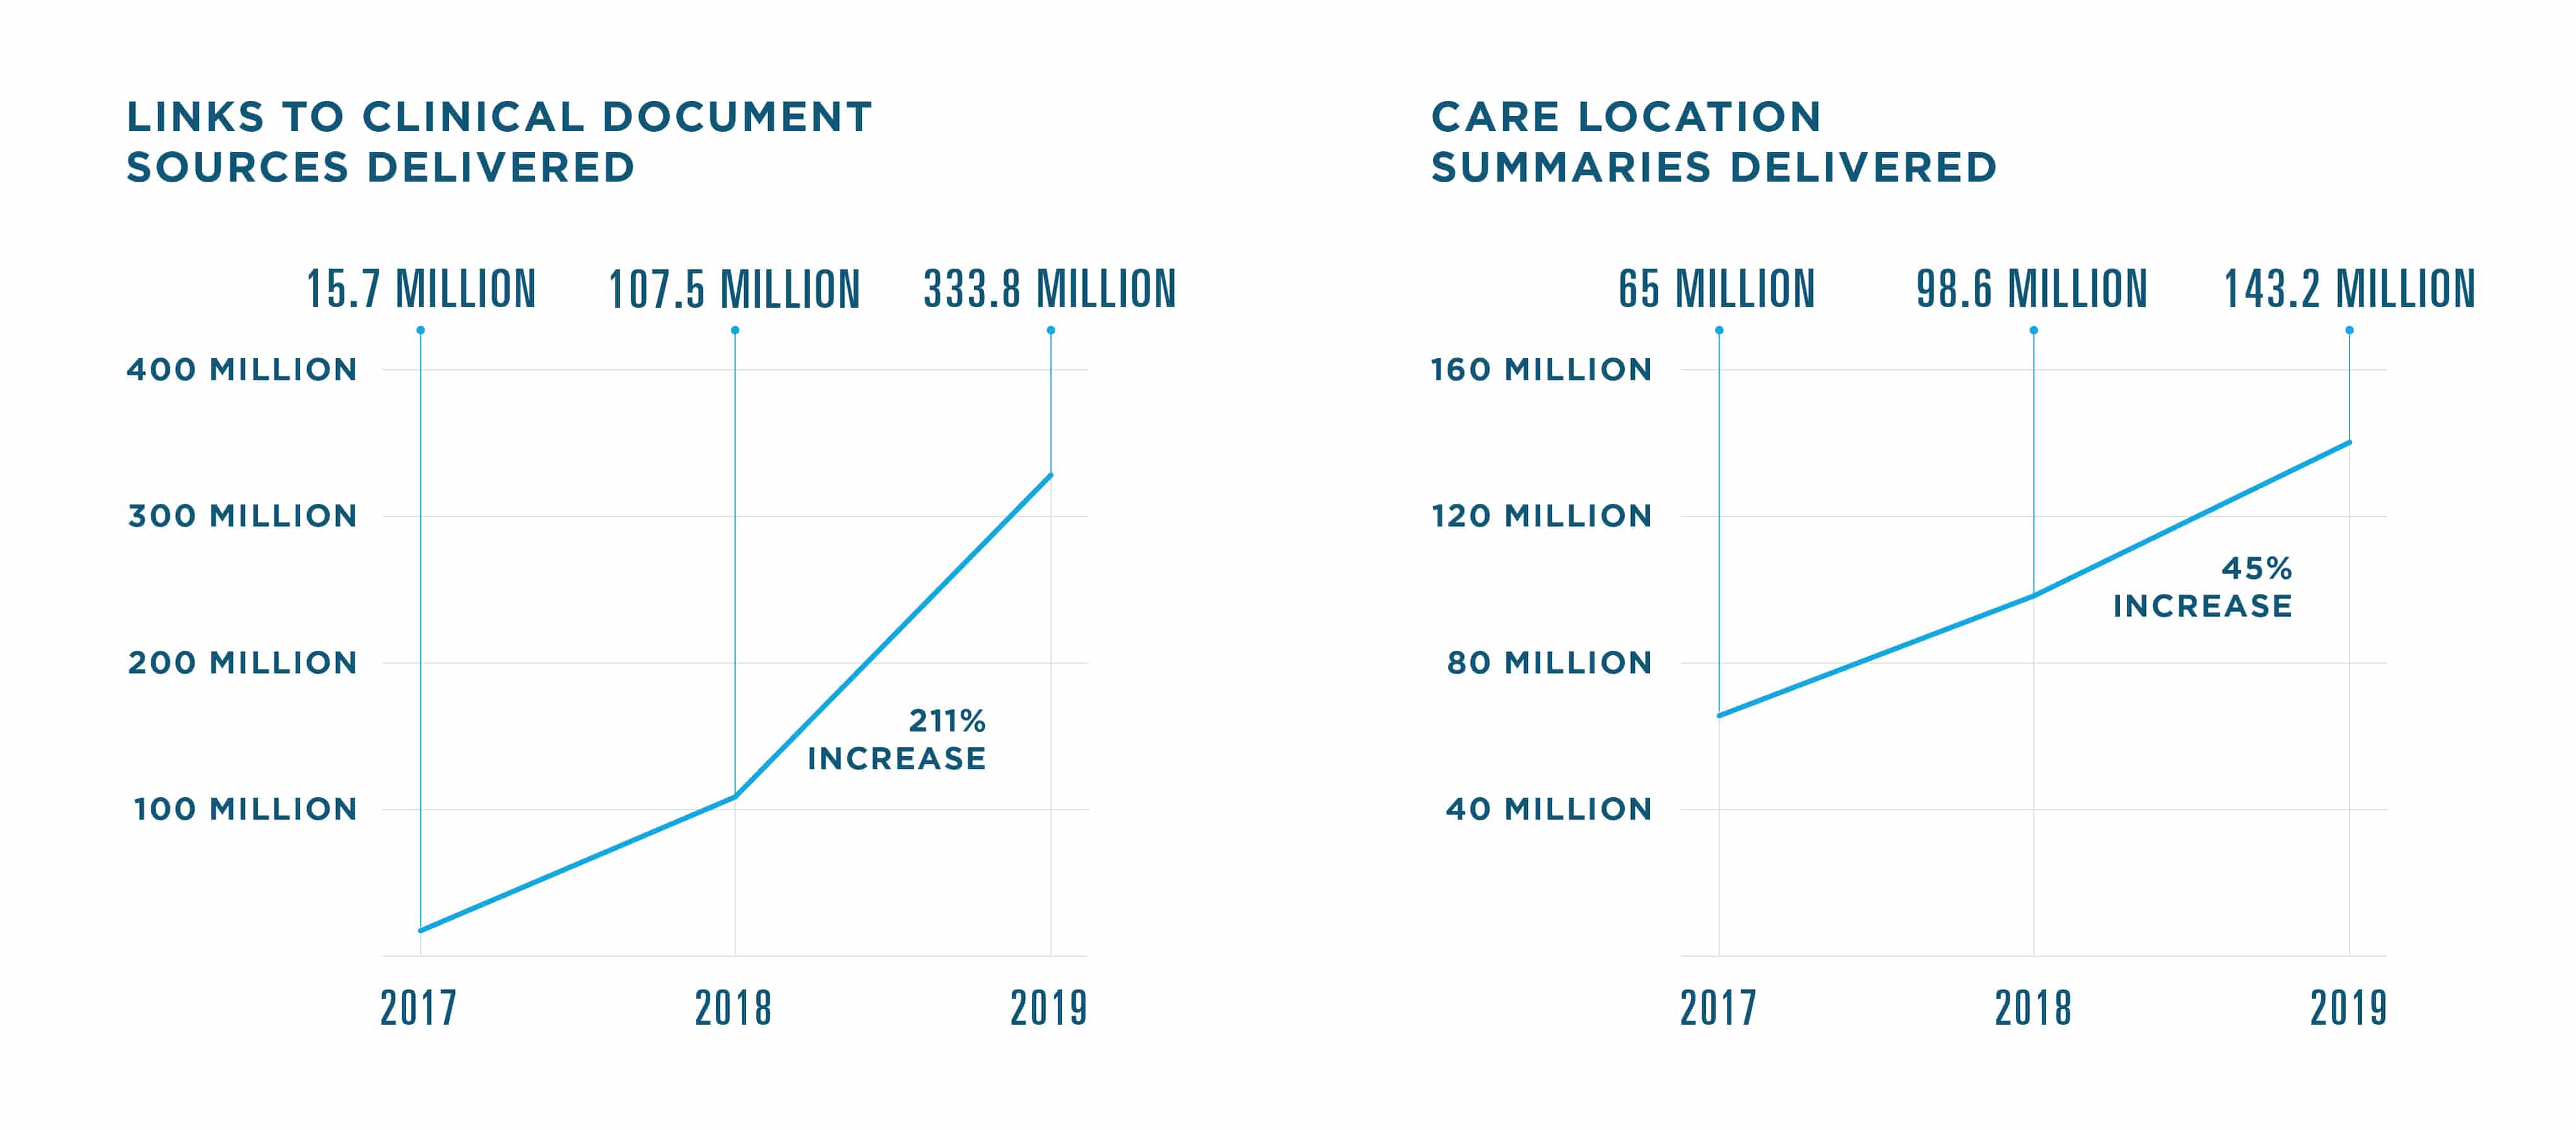 Record Locator & Exchange delivered 333.8 million links to clinical document sources in 2019, a 211% increase from 107.5 million in 2018. 15.7 million were delivered in 2017. Record Locator & Exchange also delivered 143.2 million care location summaries in 2019, a 45% increase from 98.6 million in 2018. 65 million were delivered in 2017.